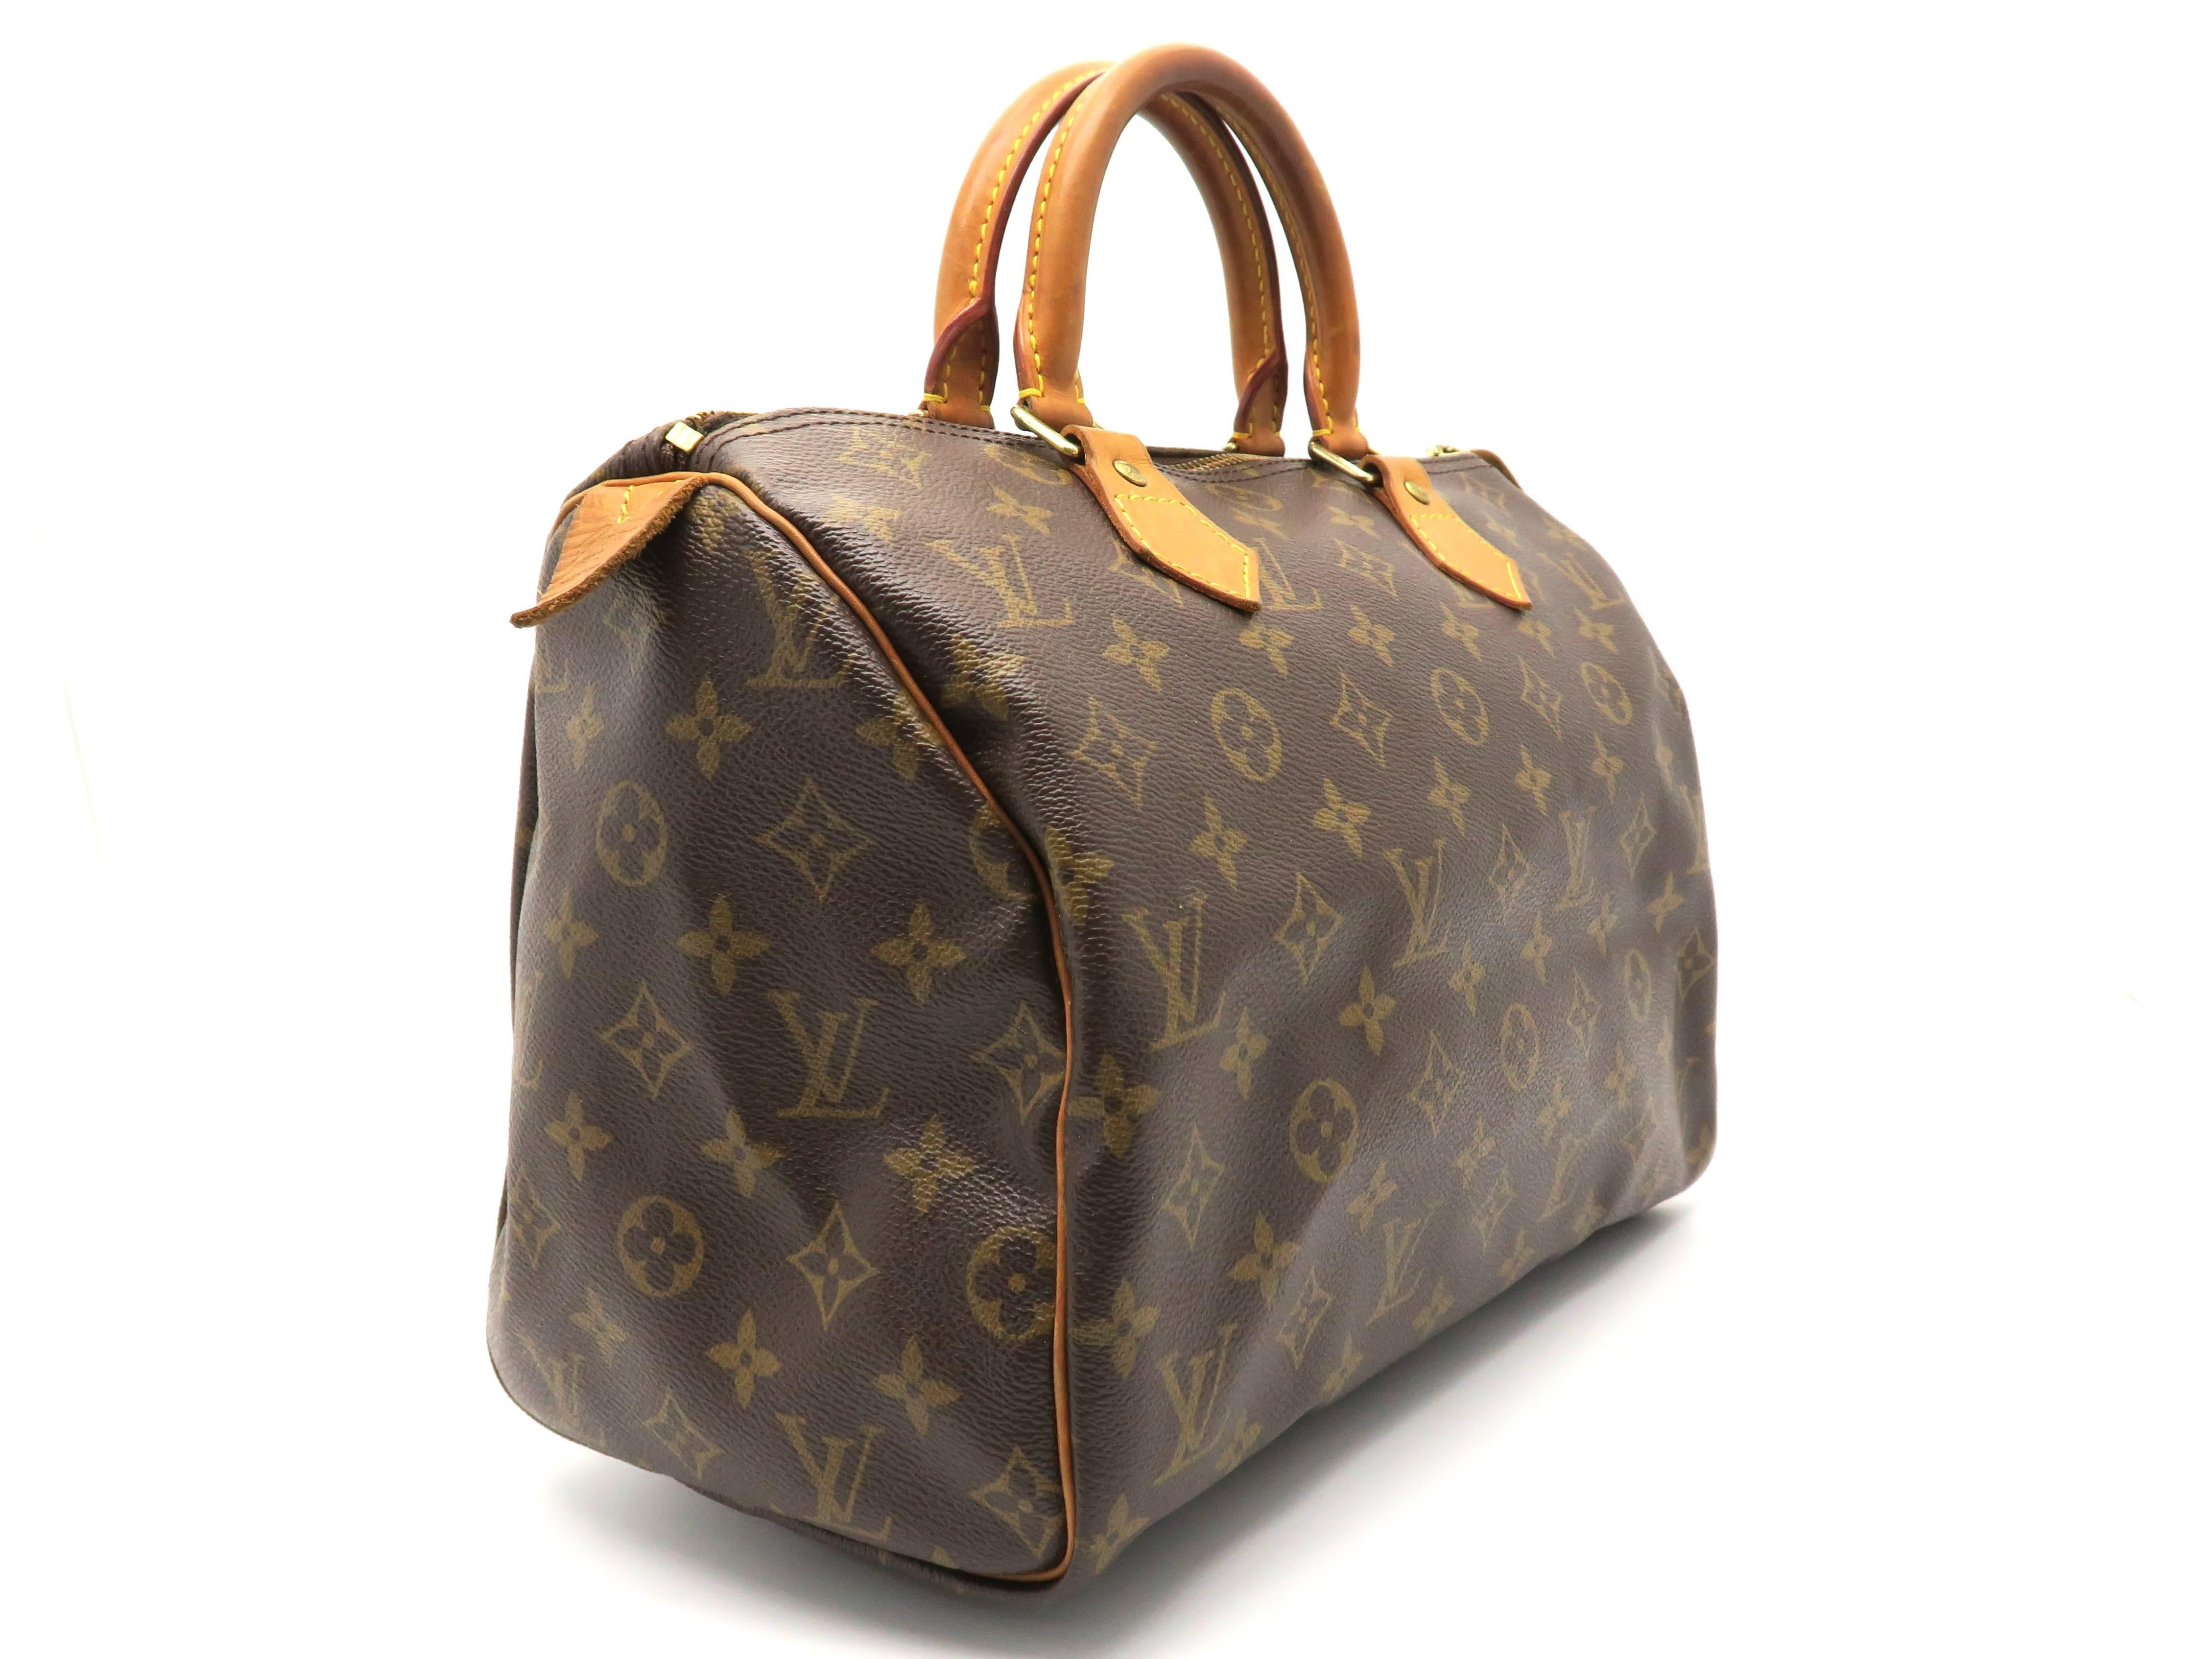 Color: Brown 

Material: Monogram Canvas

Condition: Rank B
Overall: Fair. Few defects 
Surface: Minor Scratches
Corners: Obvious Scratches
Edges: Obvious Scratches
Handles/Straps: Minor Scratches
Hardware: Minor Scratches

Dimension: W30 × H20 ×